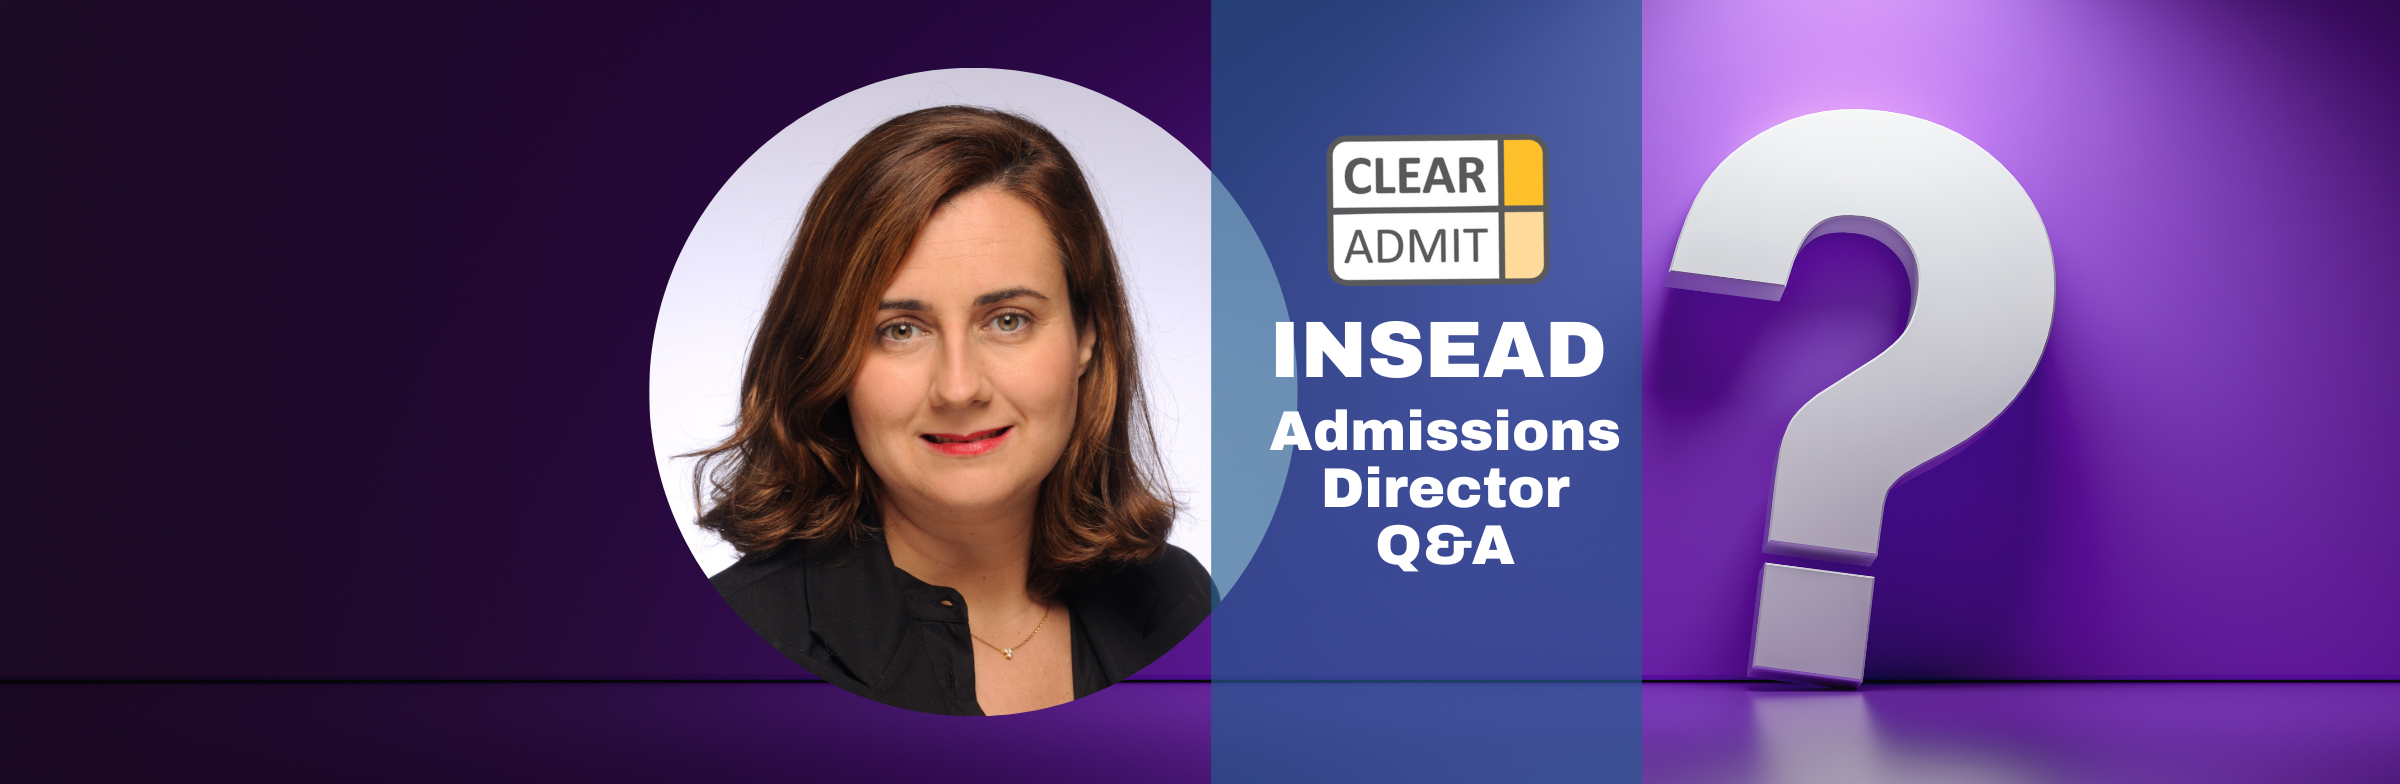 Image for Admissions Director Q&A: Teresa Peiro-Camaro of INSEAD